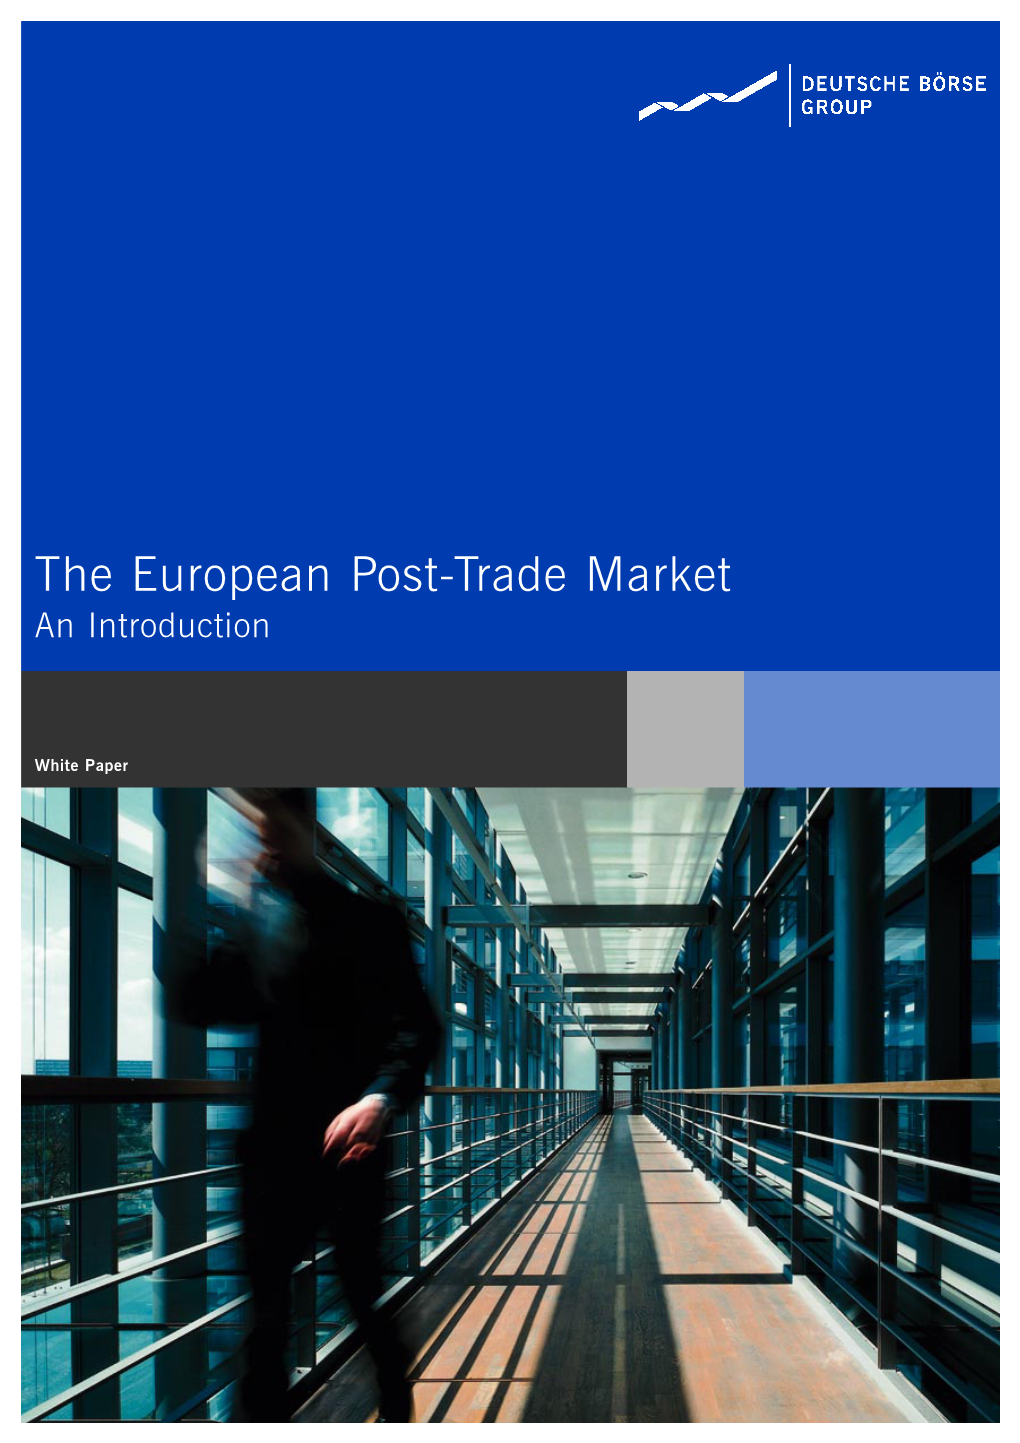 The European Post-Trade Market an Introduction